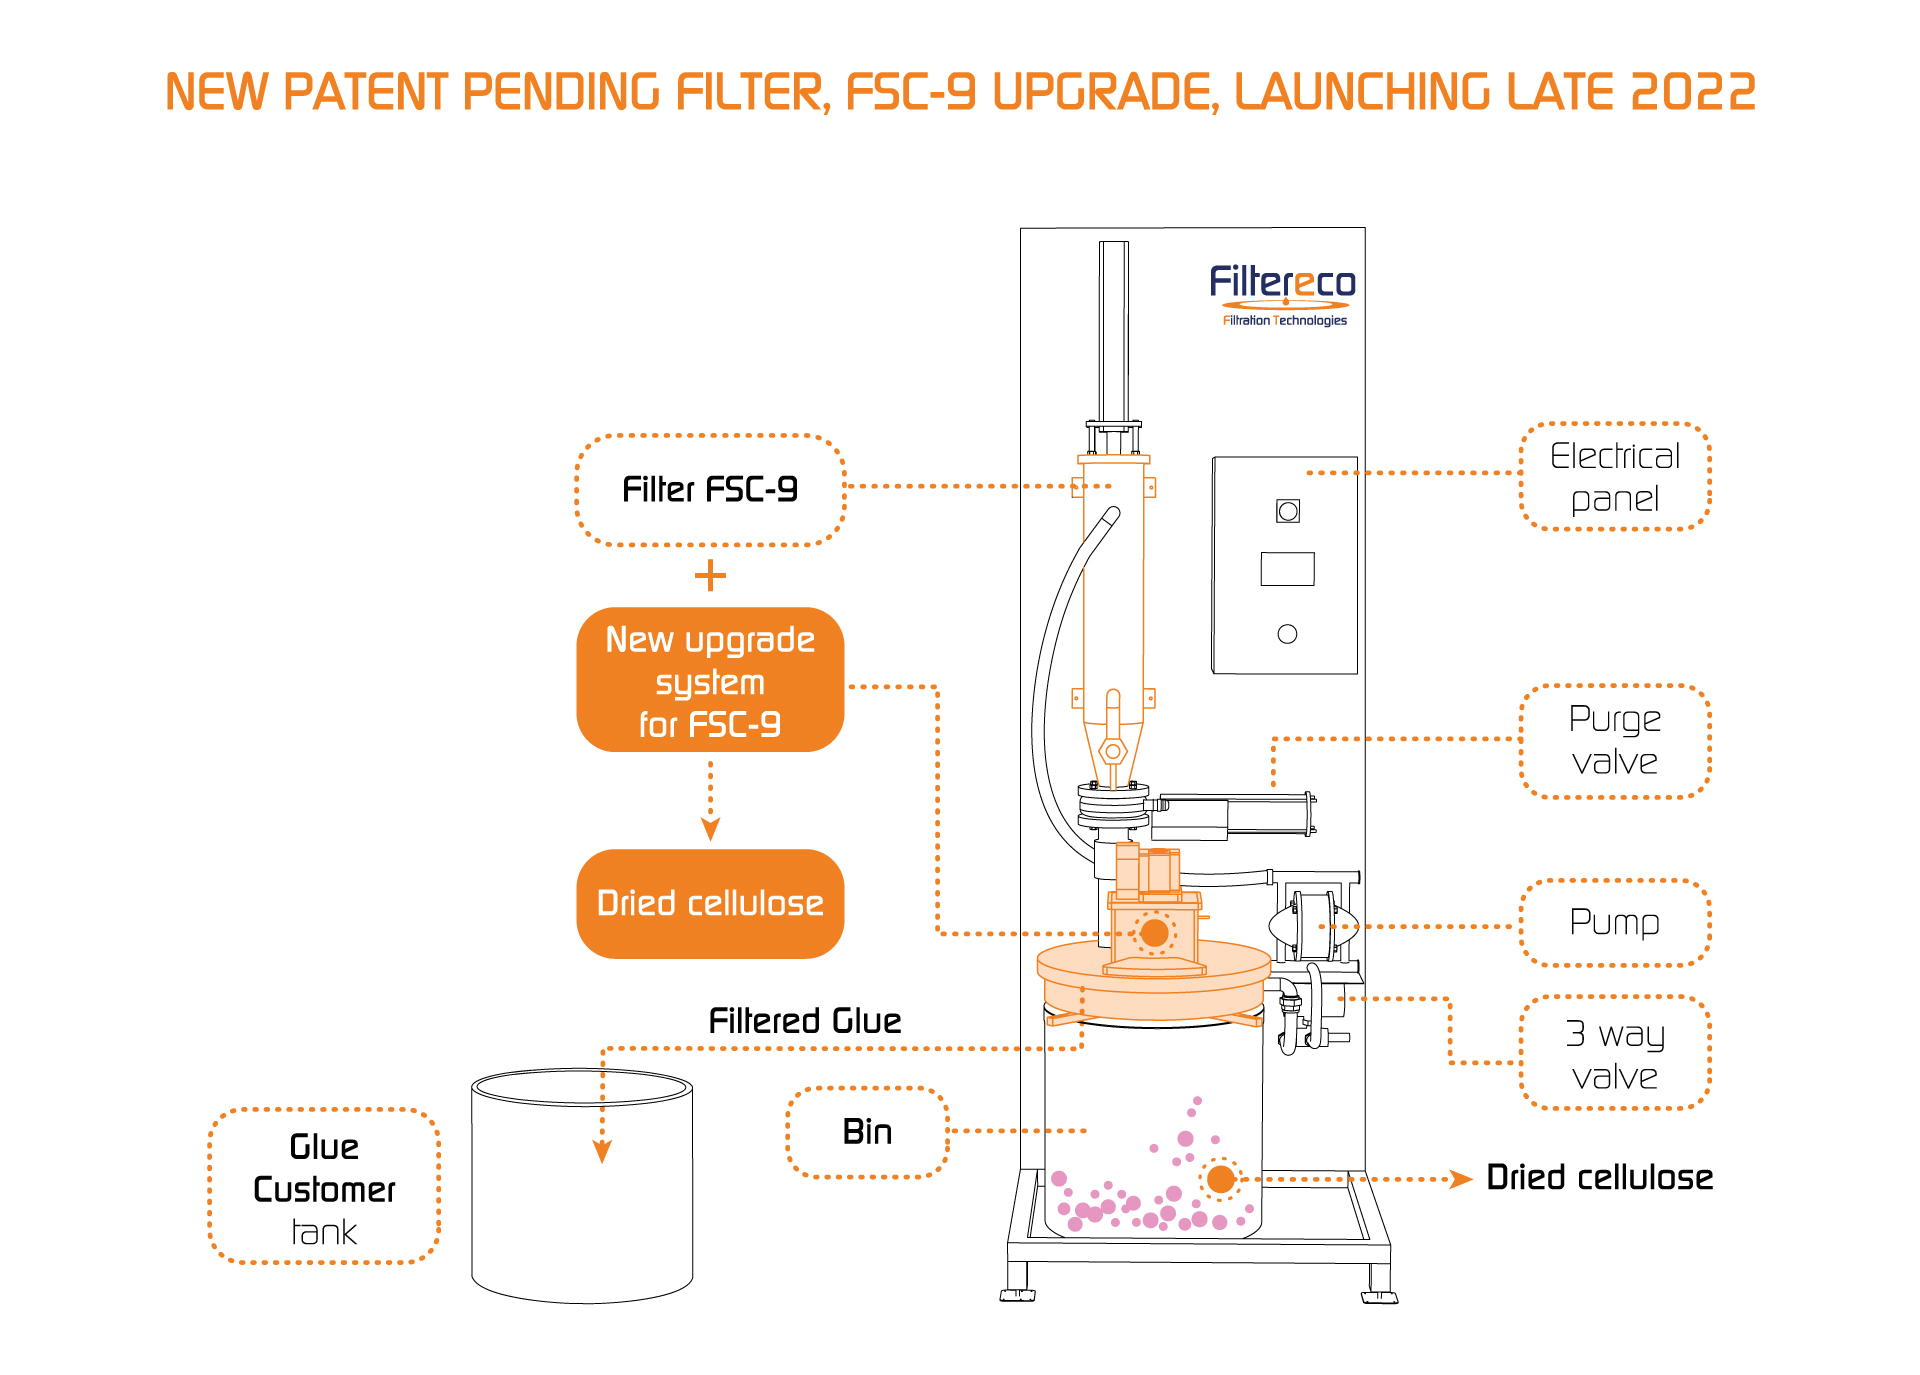 Upgrade for FSC-9 - PATENT PENDING. self-cleaning system for glue filtration in the tissue industry